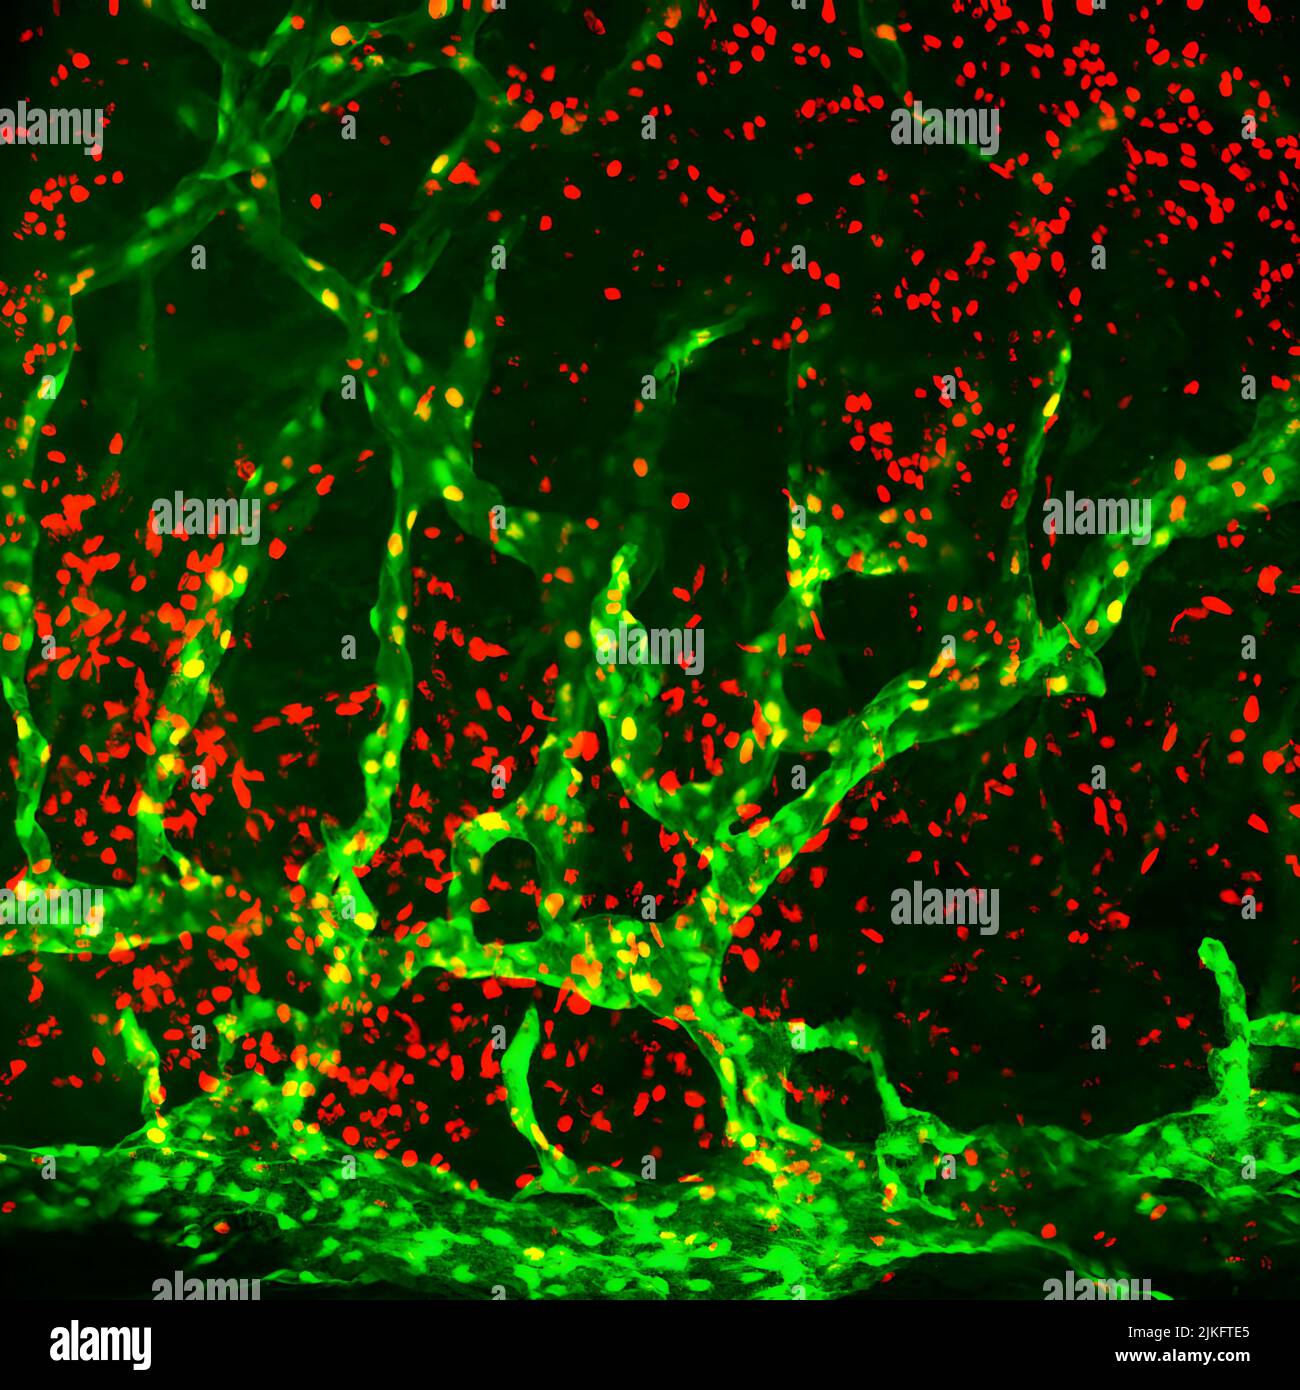 The galectin-8 pellet was deployed in the cornea of a Prox1-EGFP reporter mouse. On day 7 after implantation, the corneal flat mount was stained with an anti-Ki67 antibody. About 40% of lymphatic endothelial cells were proliferative (Prox1+Ki67+). Green: Prox1. Red: Ki67. Related publication: Pathologic lymphangiogenesis is modulated by galectin-8-dependent crosstalk between podoplanin and integrin-associated VEGFR-3. Communication Nature, 2016. Stock Photo